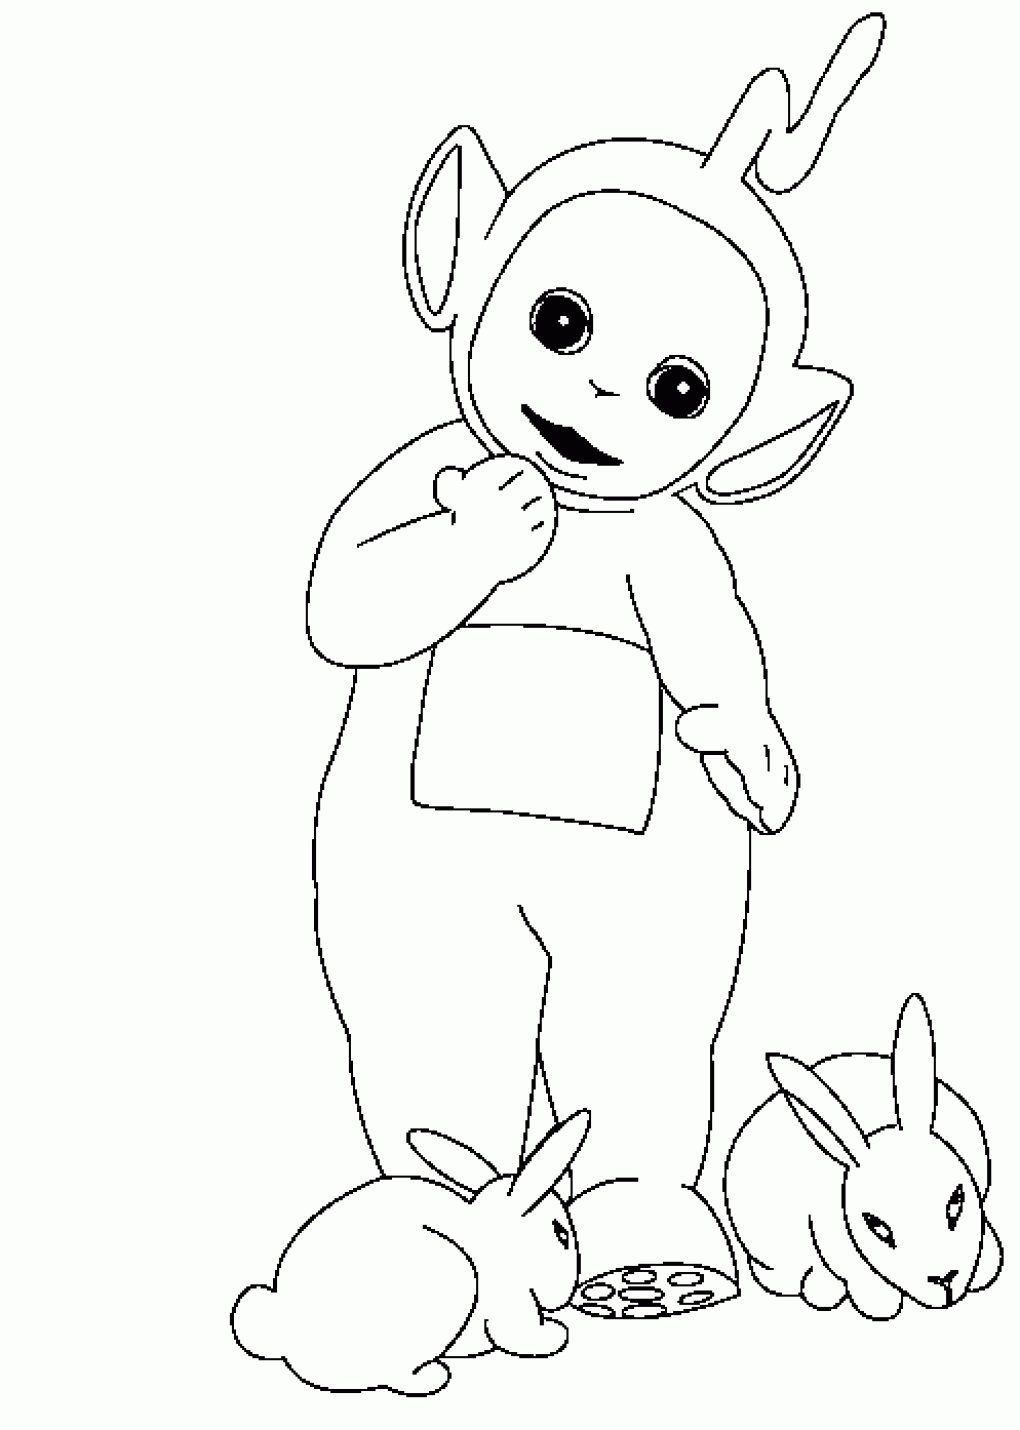 teletubbies colouring pages free printable teletubbies coloring pages for kids pages teletubbies colouring 